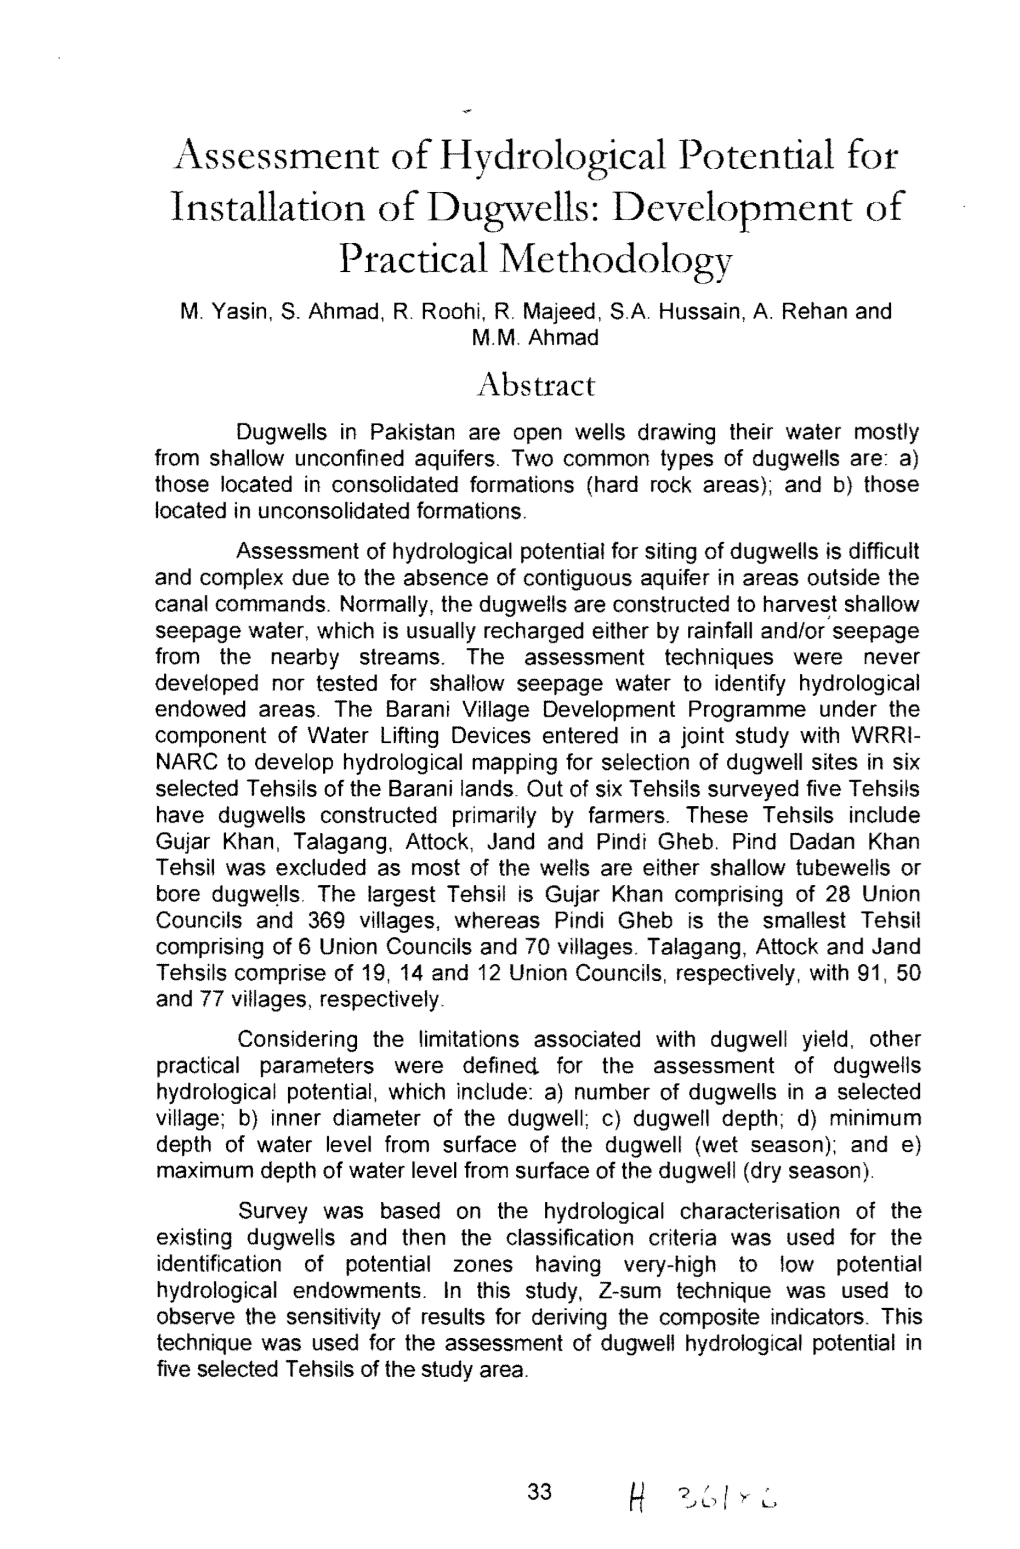 1T\Ssessment of Hydrological Potential for Installation of Dugwells: Development of Practical Iviethodology